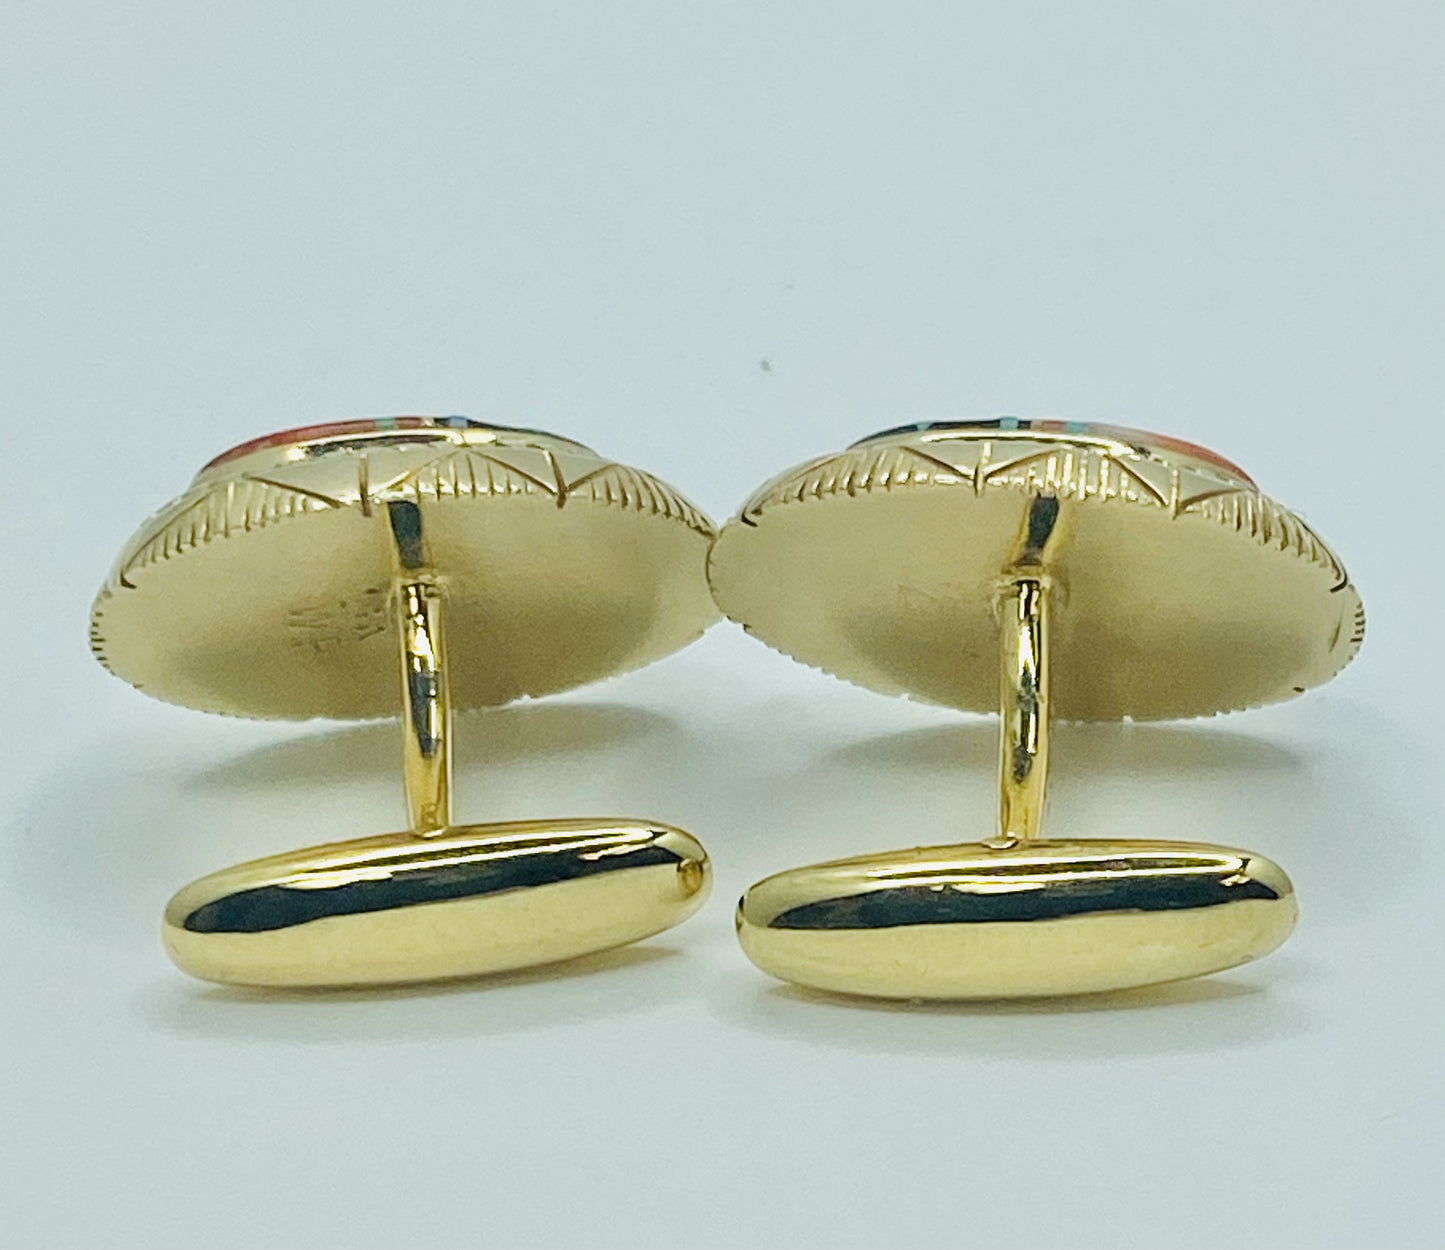 14K /18K Onyx, Coral, Turquoise Cuff Links